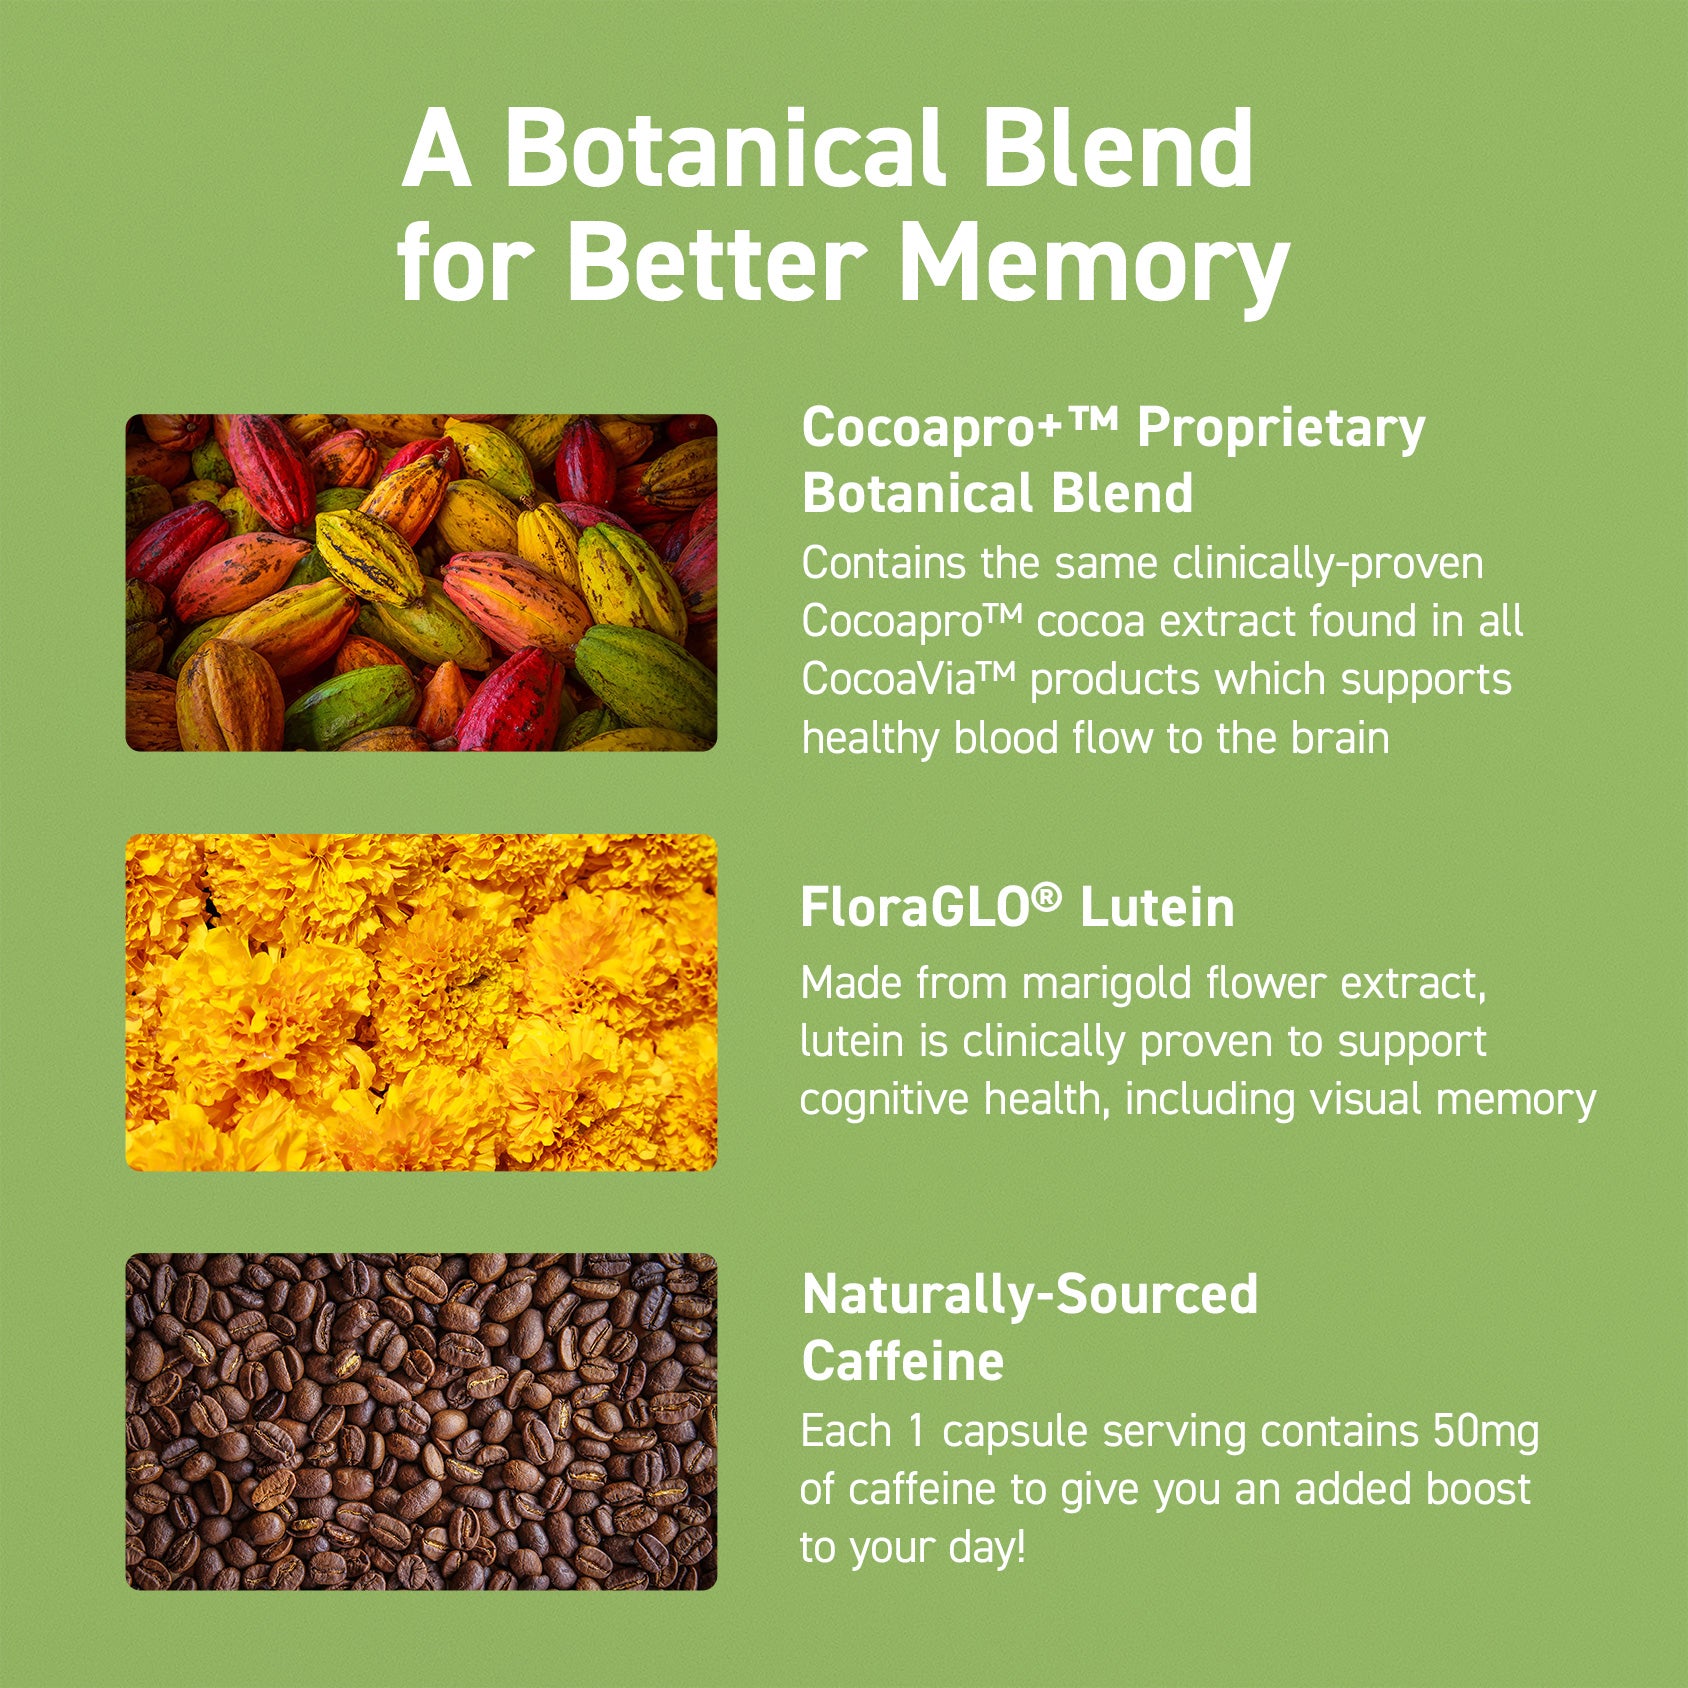 a botanical blend for better memory: Cocoapro propreitary botanical blend. contains the same clinically proven cocoapro cocoa extract found in all CocoaVia products to support healthy blood flow to the brain. Floraglo lutein: made from marigold flower extract, lutein is clinically proven to support cognitive health, including visual memory. +Plus Naturally-sourced caffeine. Each 1 capsule serving contains 50mg of caffeine to give you an added boost to your day!